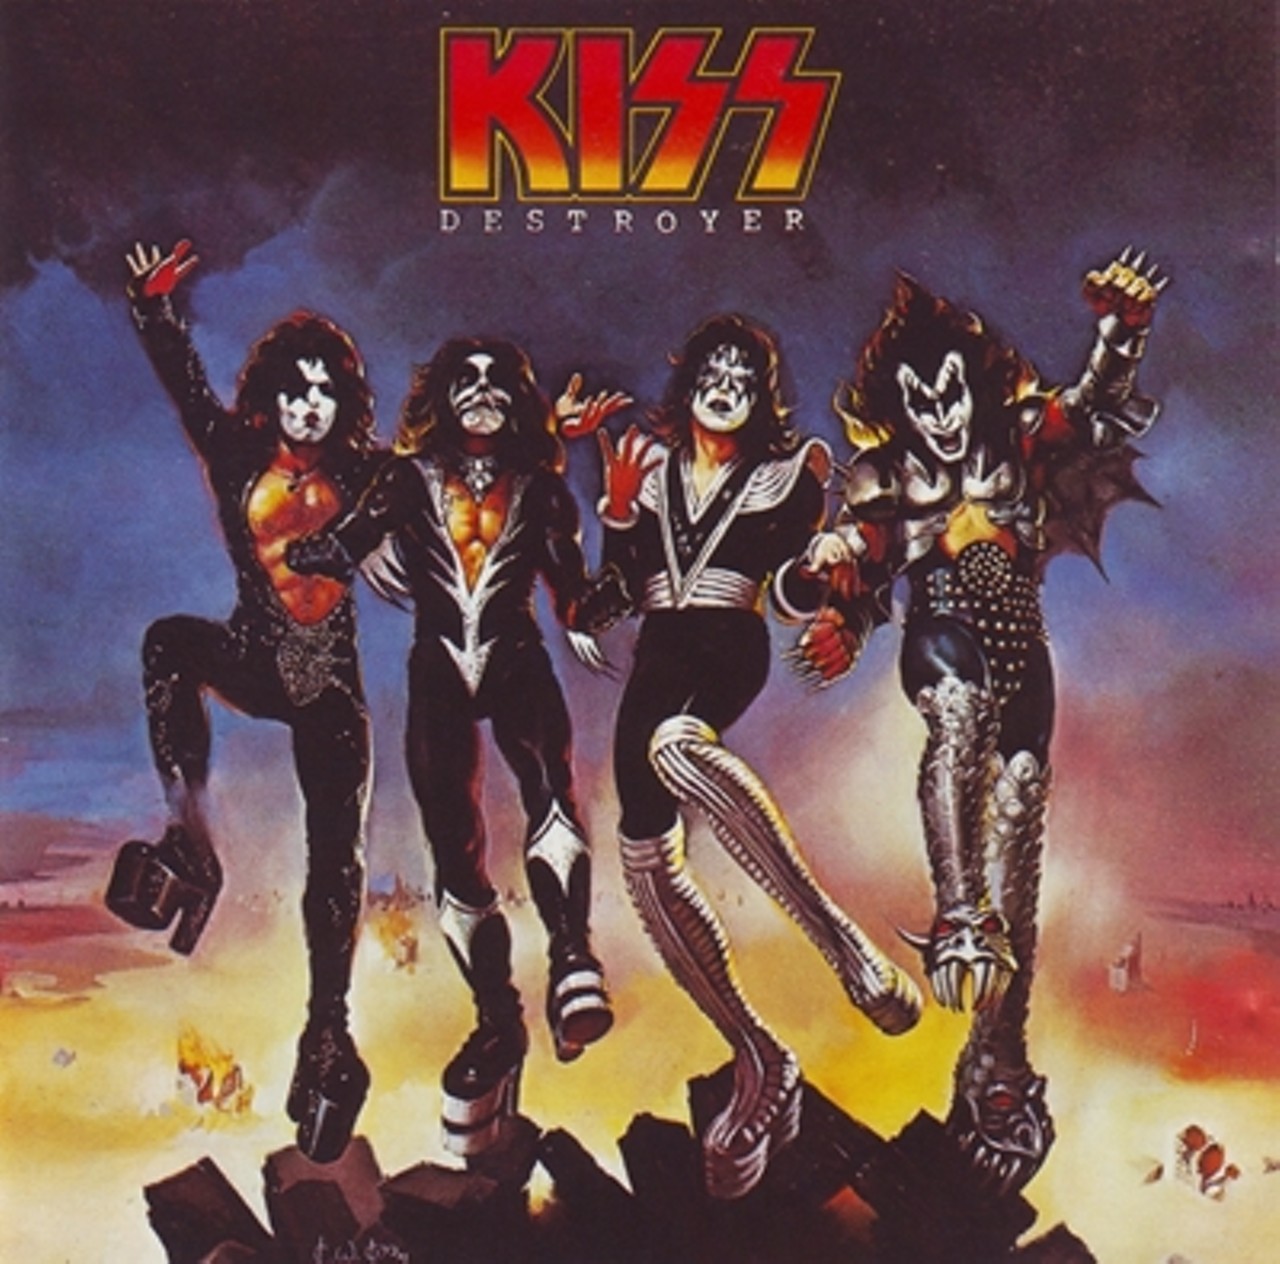 On the heels of the band’s breakthrough live album Alive!, KISS went into the studio with producer Bob Ezrin and made its masterpiece, Destroyer. Rock and roll snobs can’t deny that this album is pretty damn good and filled with unforgettable rockers like “Detroit Rock City,” “Shout It Out Loud” and “Do You Love Me?” as well as the smash hit ballad “Beth.” Even lesser-known songs like “King of the Night Time World,” “Flaming Youth” and “Sweet Pain” show the band at its best. Destroyer is an all-round rock and roll classic.